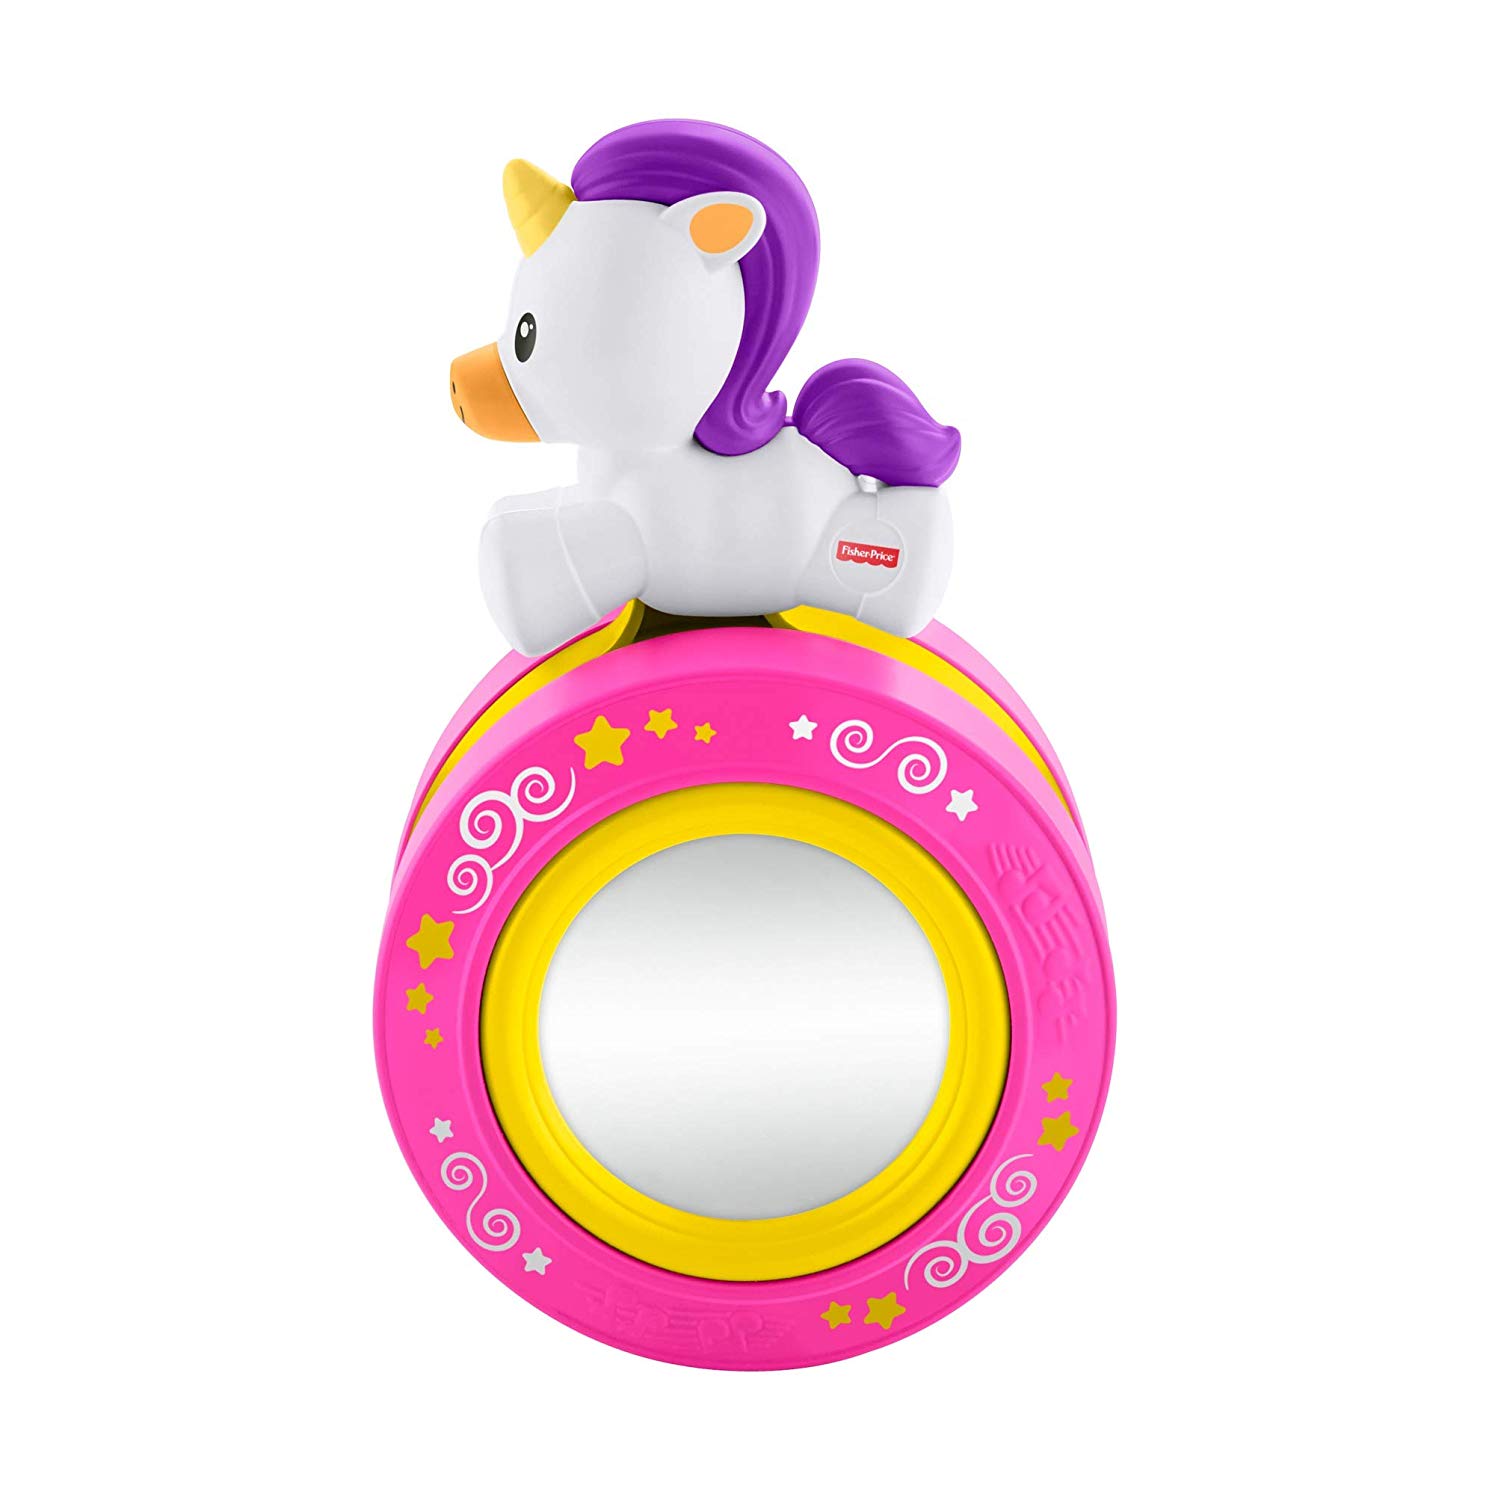 Fisher-Price Blinkilinkis Fyl46 Crawling With Mic Unicorn Reel Toy For Ages